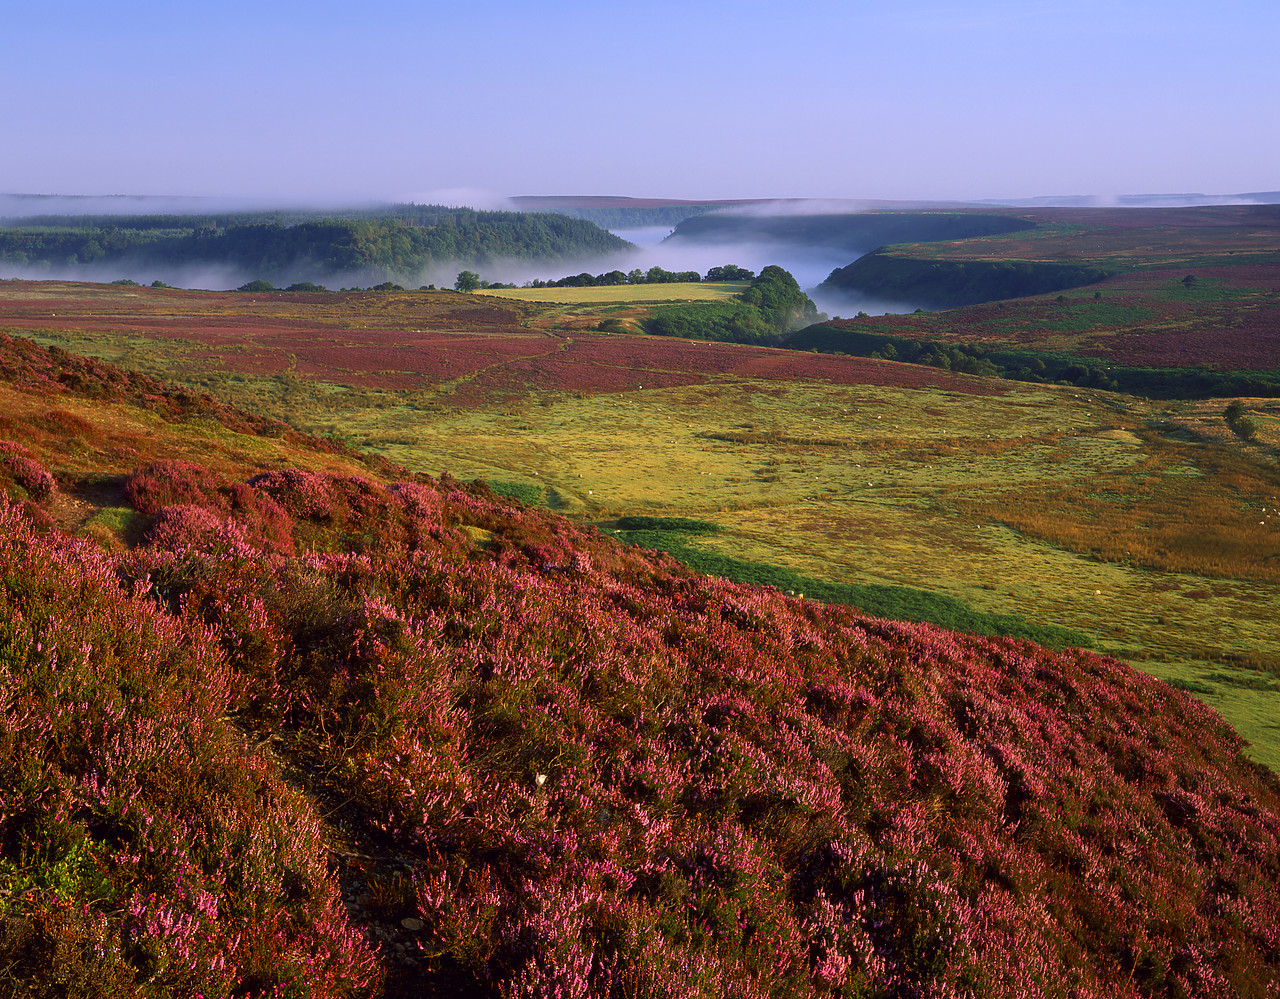 #980971-2 - Mist Over Moors, North Yorkshire, England